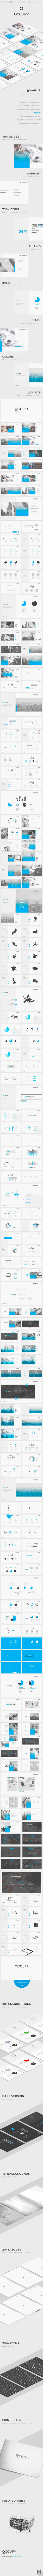 Powerpoint template presentation design company pptx Layout